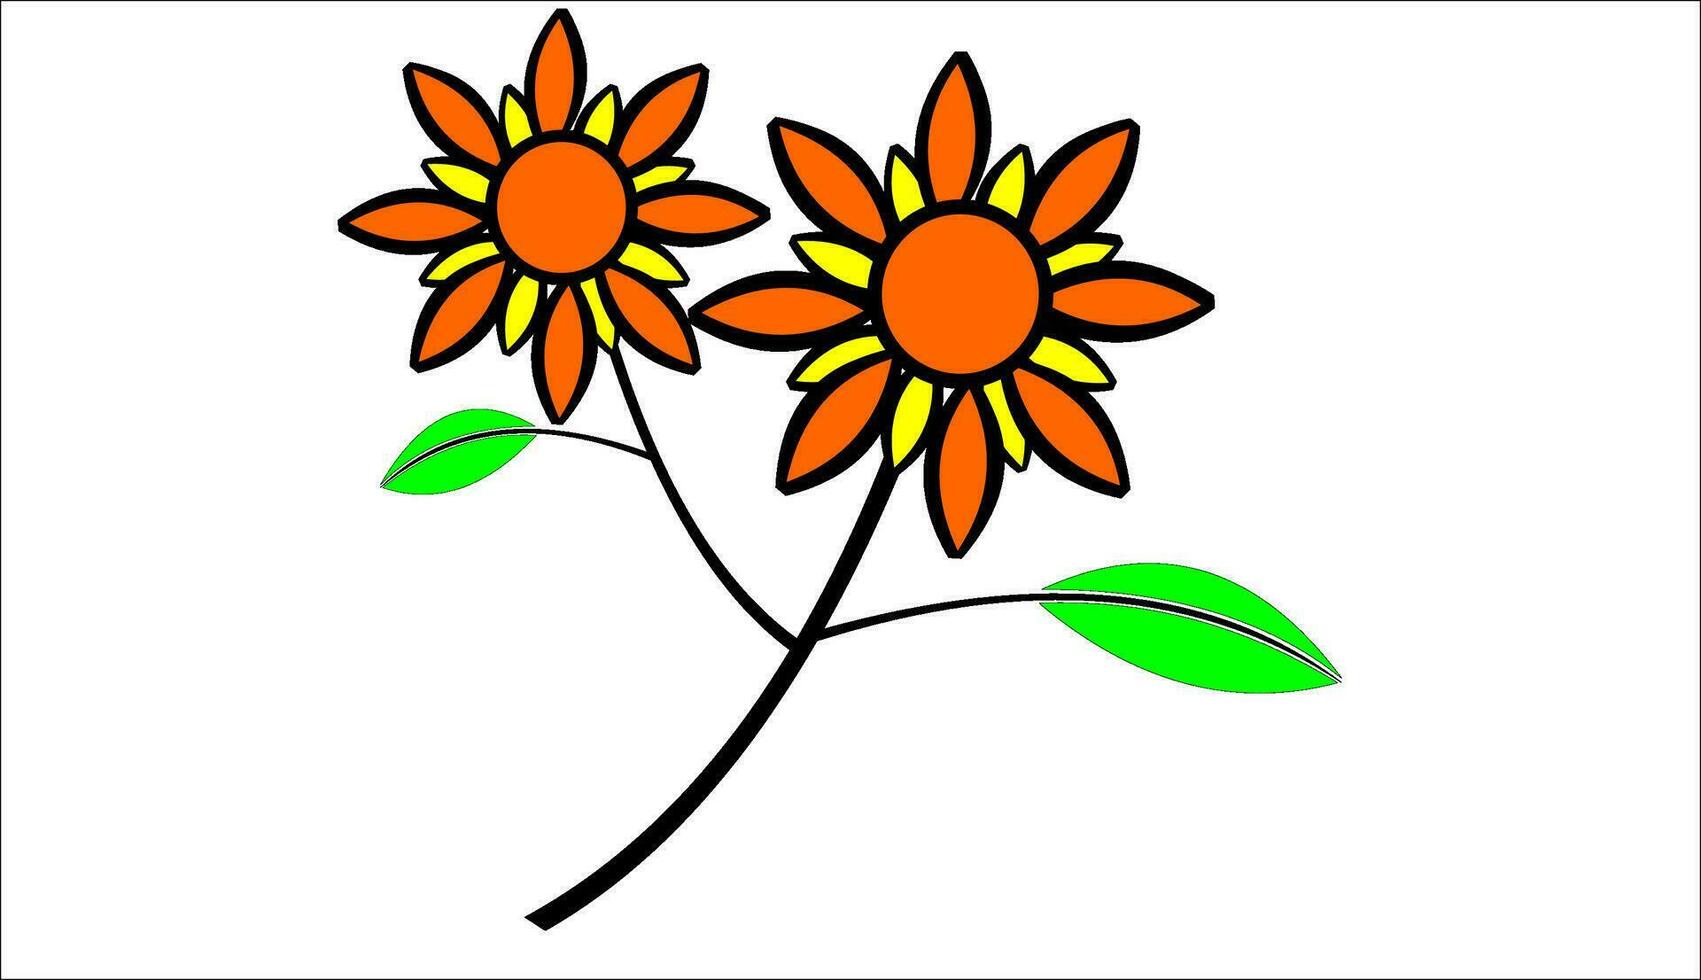 an icon depicting a flower vector